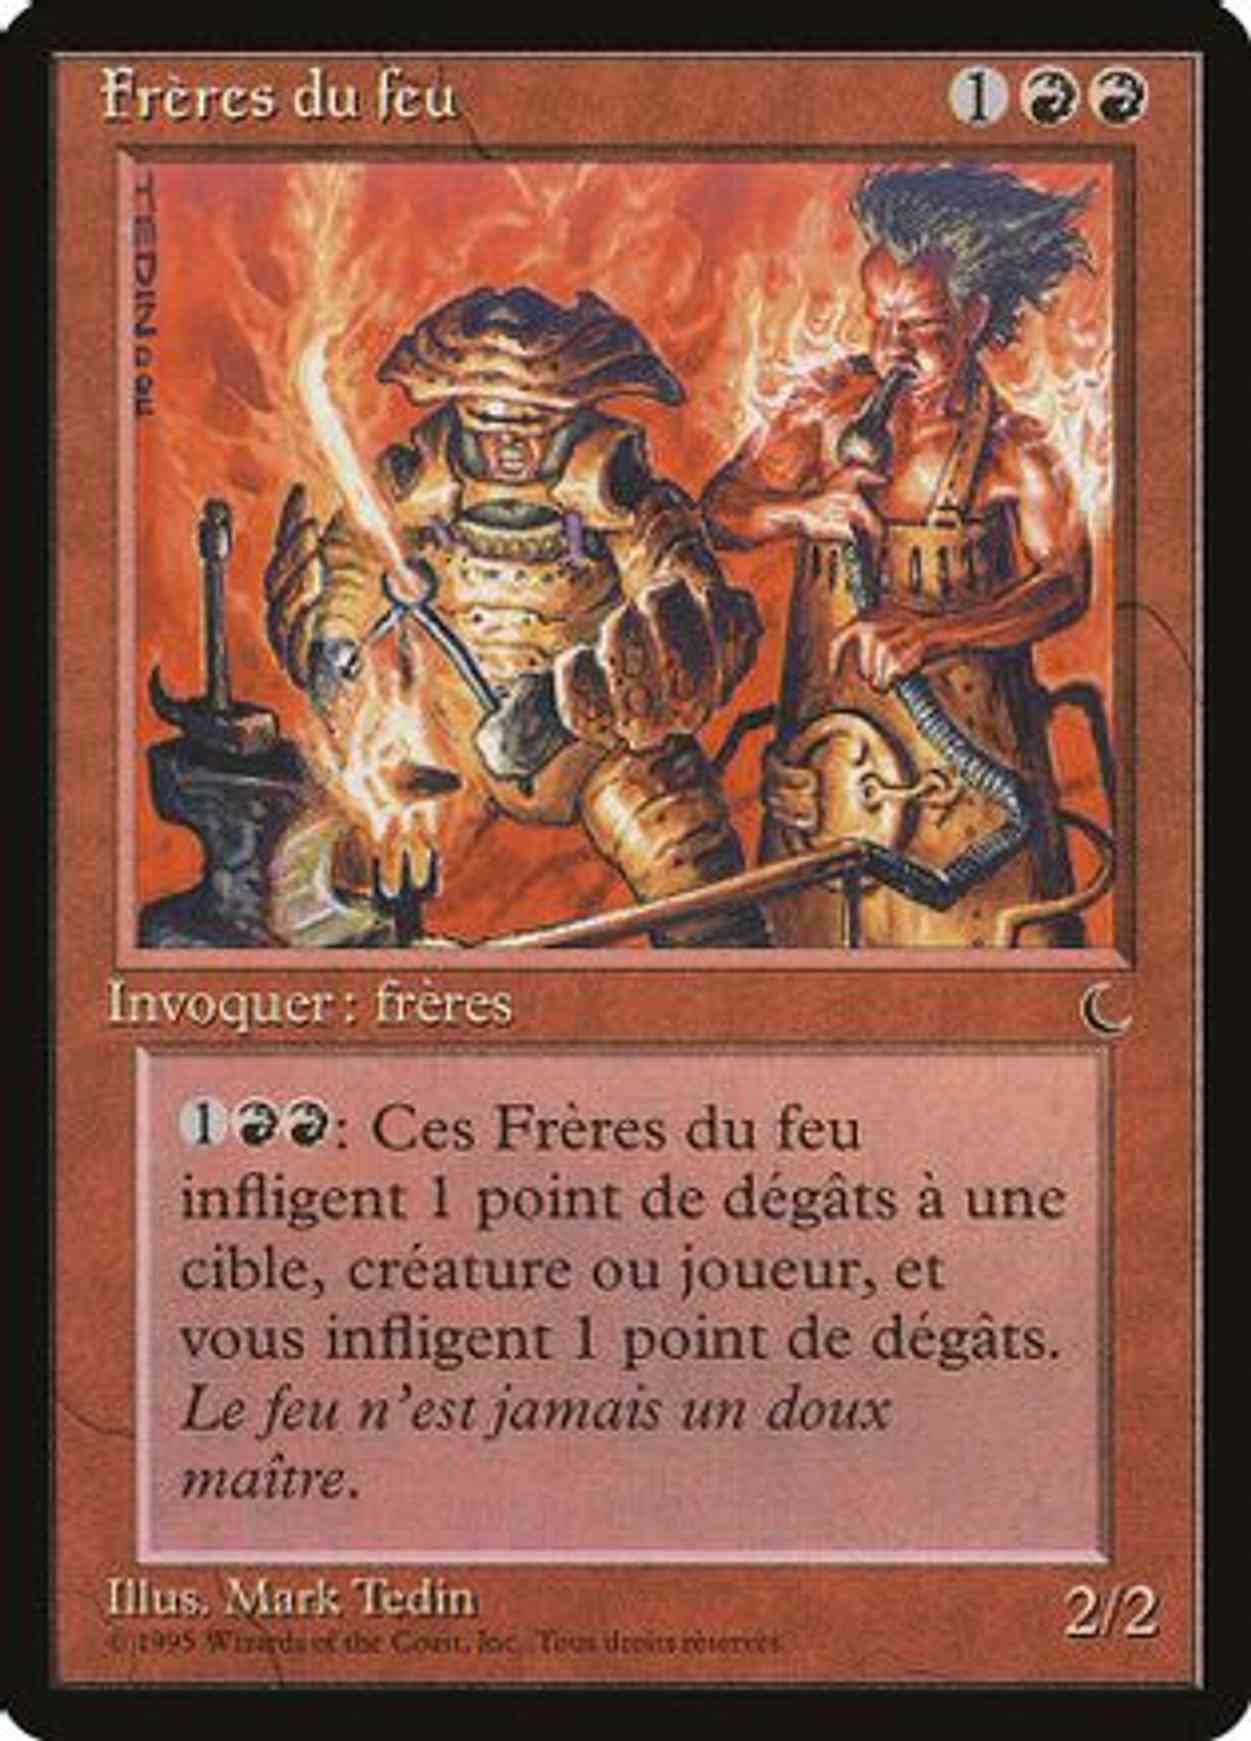 Brothers of Fire (French) - "Freres du feu" magic card front